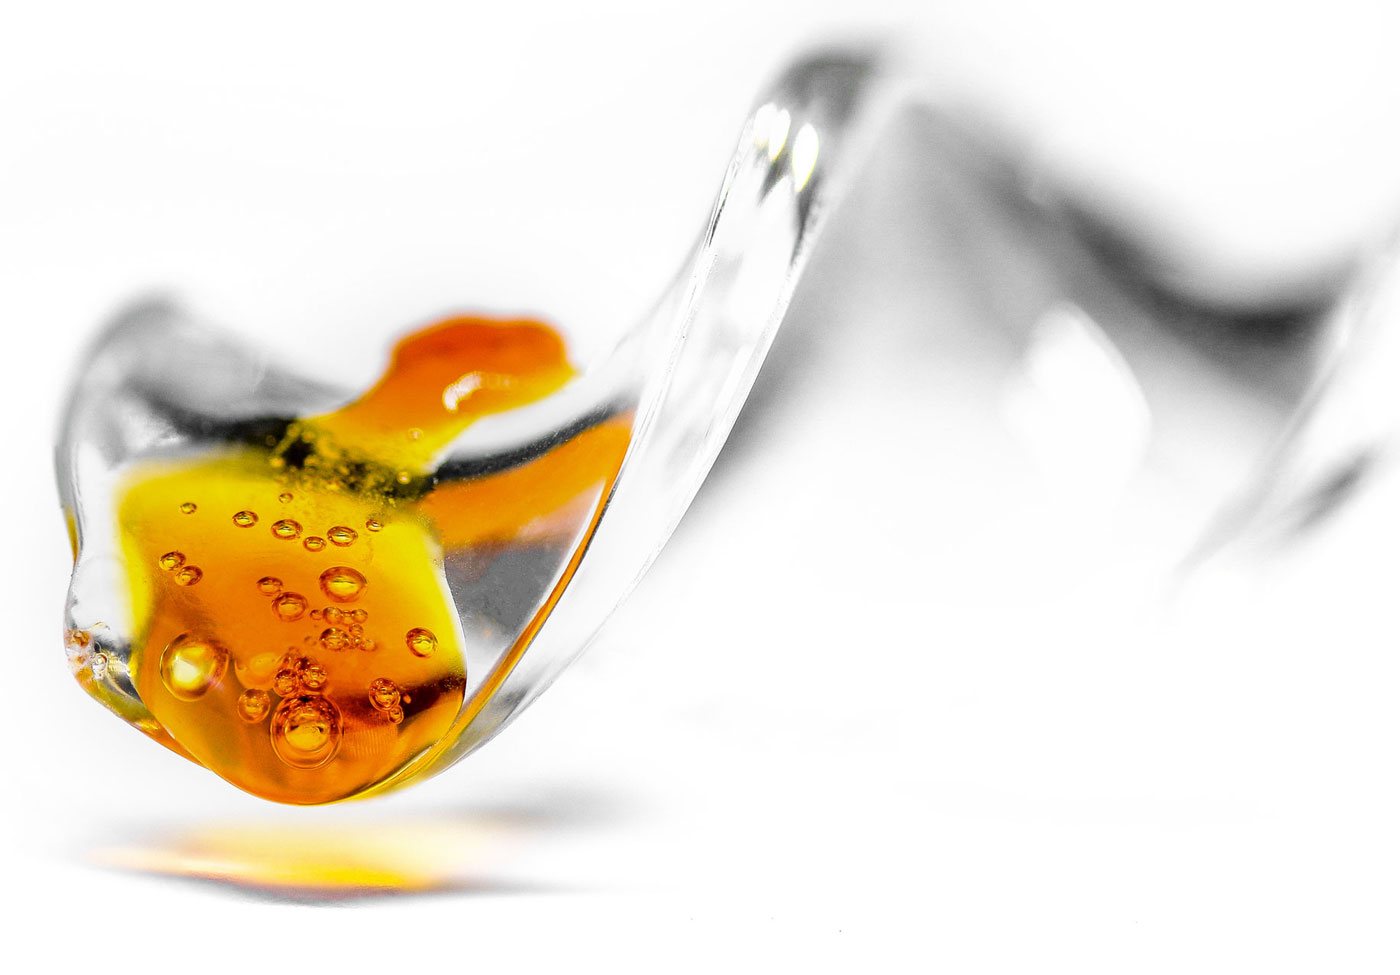 Closeup photo of shatter cannabis concentrate